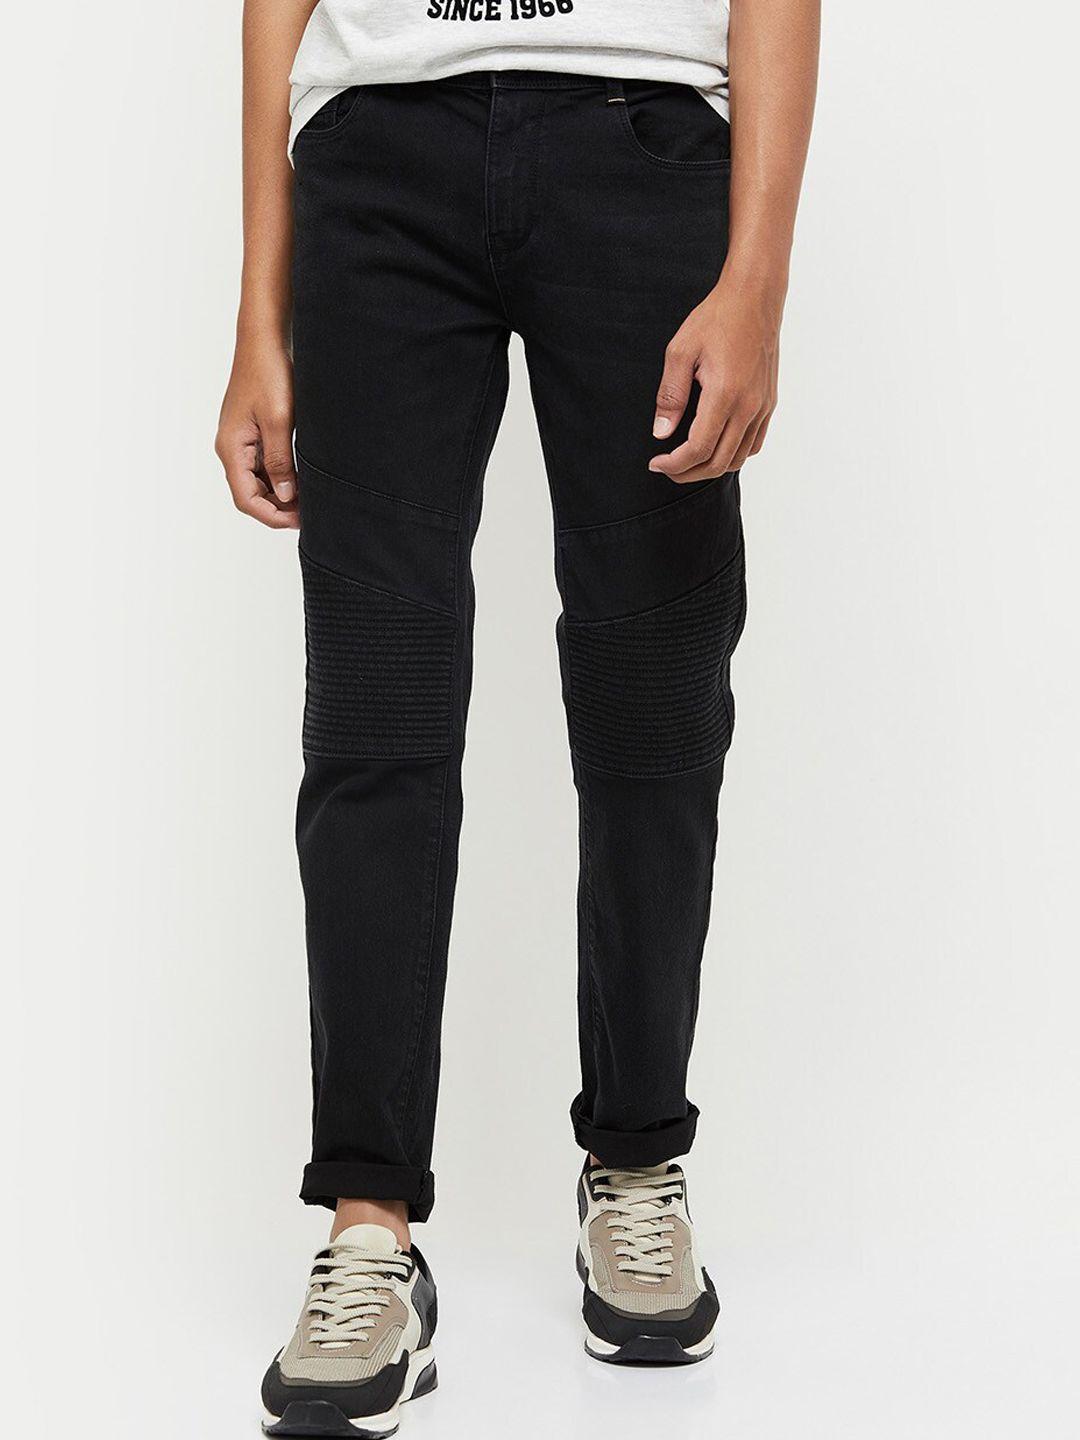 max-boys-charcoal-grey-solid-jeans